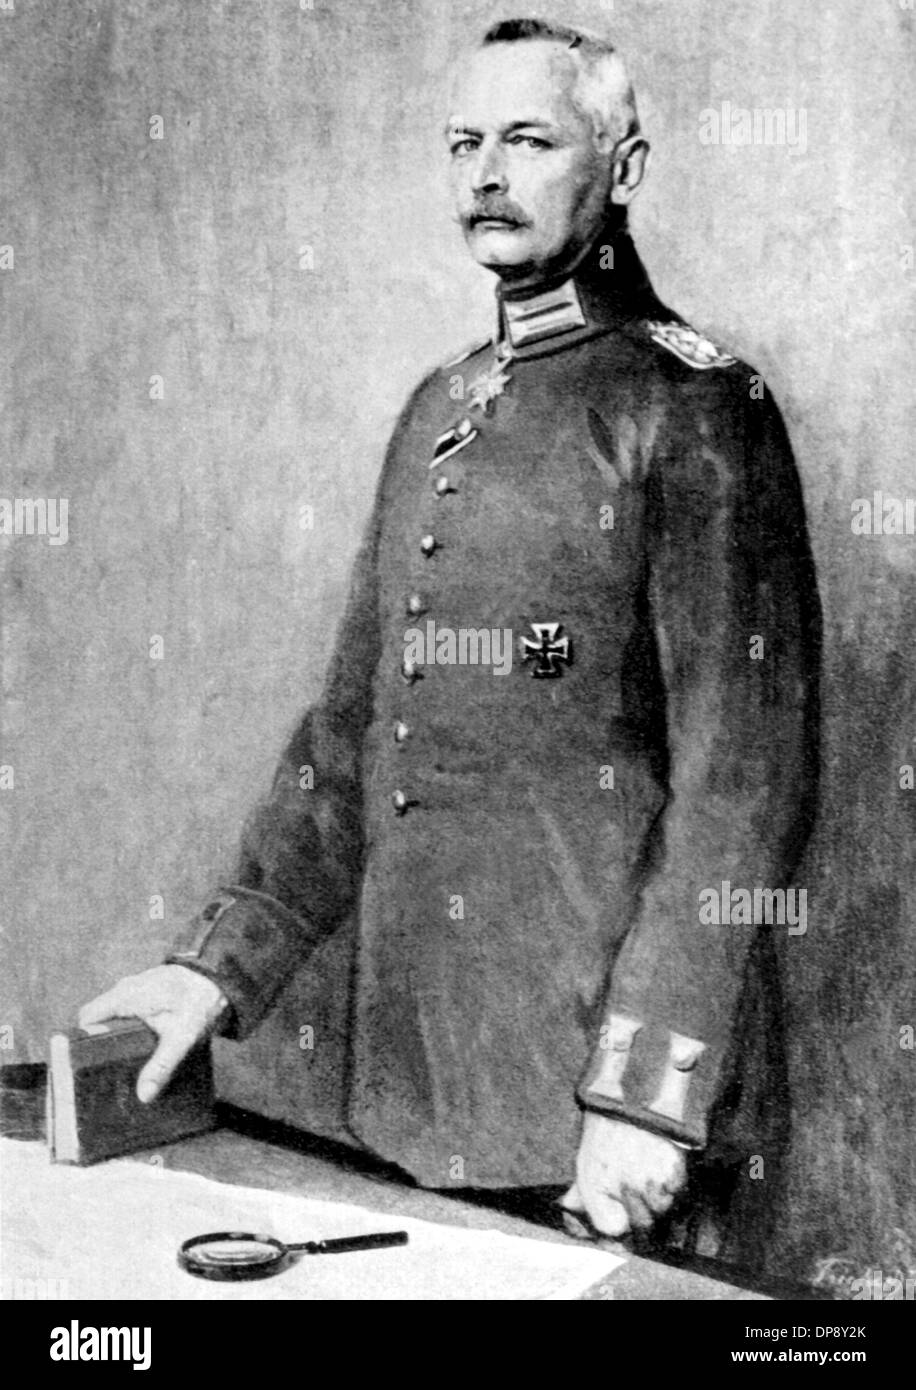 Prussian General of the infantry Erich von Falkenhayn after a painting by Franz Triebsch. He was minister of war between 1913 and 1915 and later Chief of the General Staff. He led the army against Romania in 1916.  He was born on the 11th of November in 1861 in Burg Belchau and died on the 8th of April in 1922 near Potsdam. Stock Photo